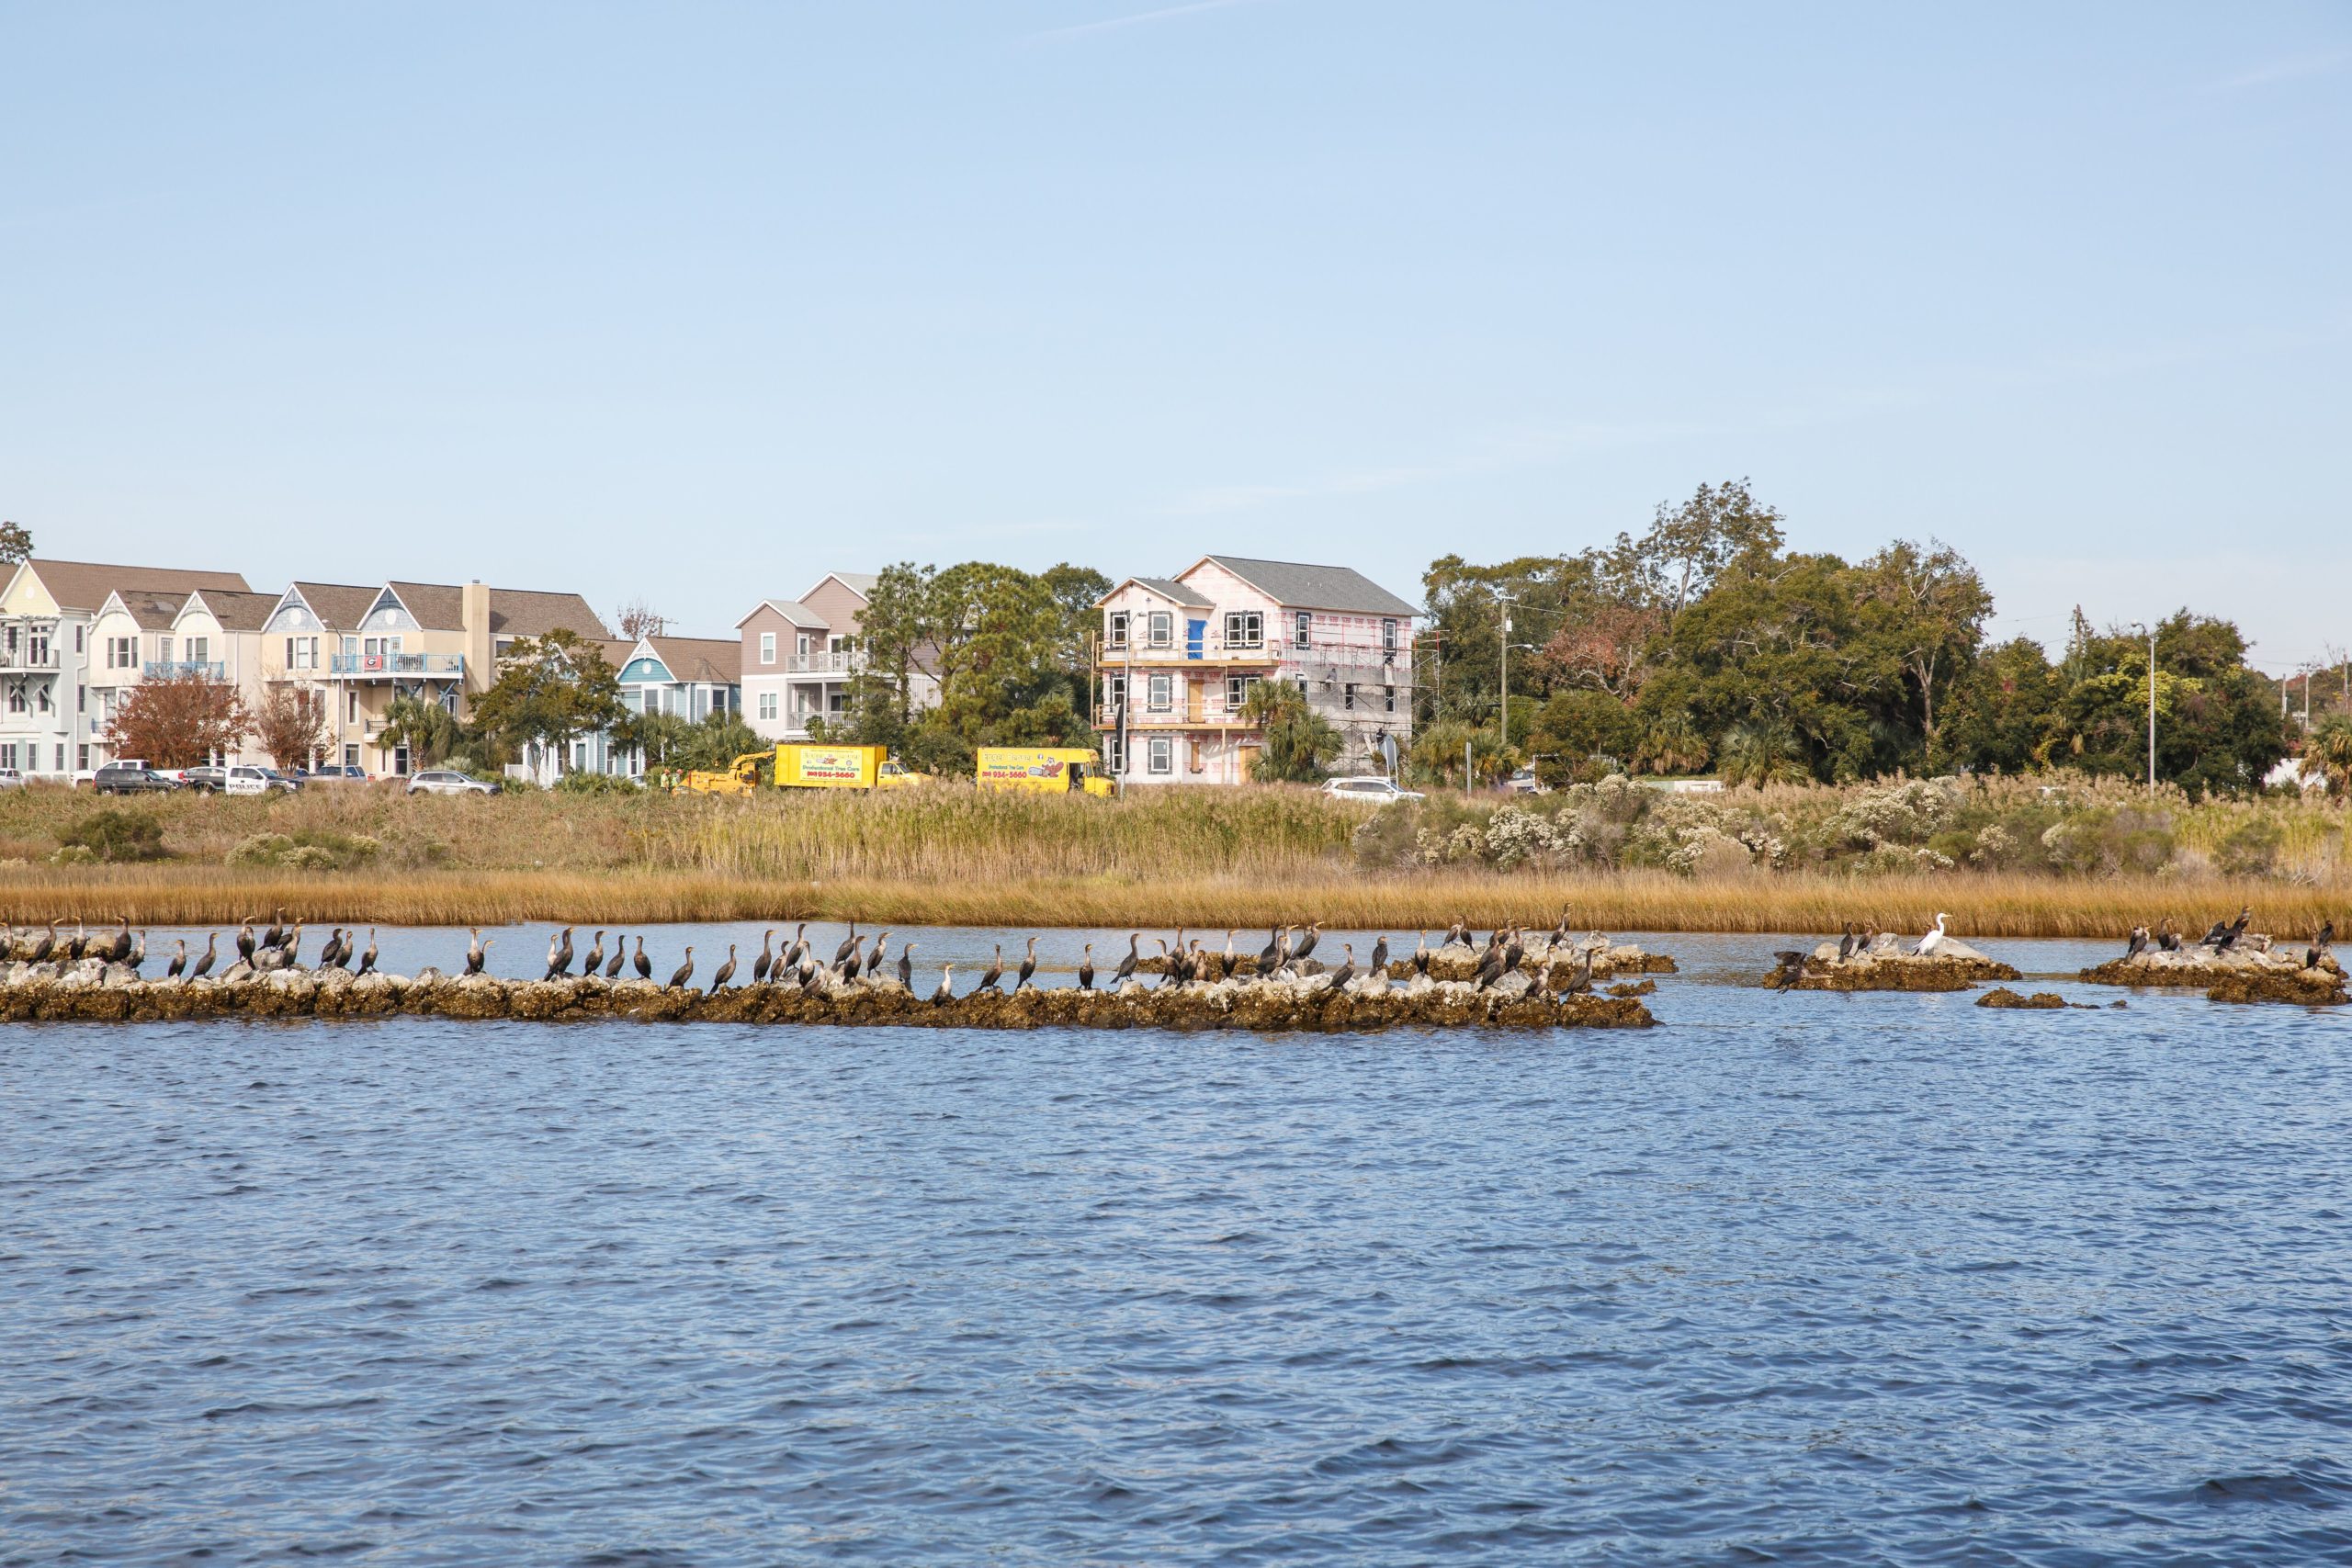 Double crested cormorants and a great egret sit atop the oyster reef of a living shoreline